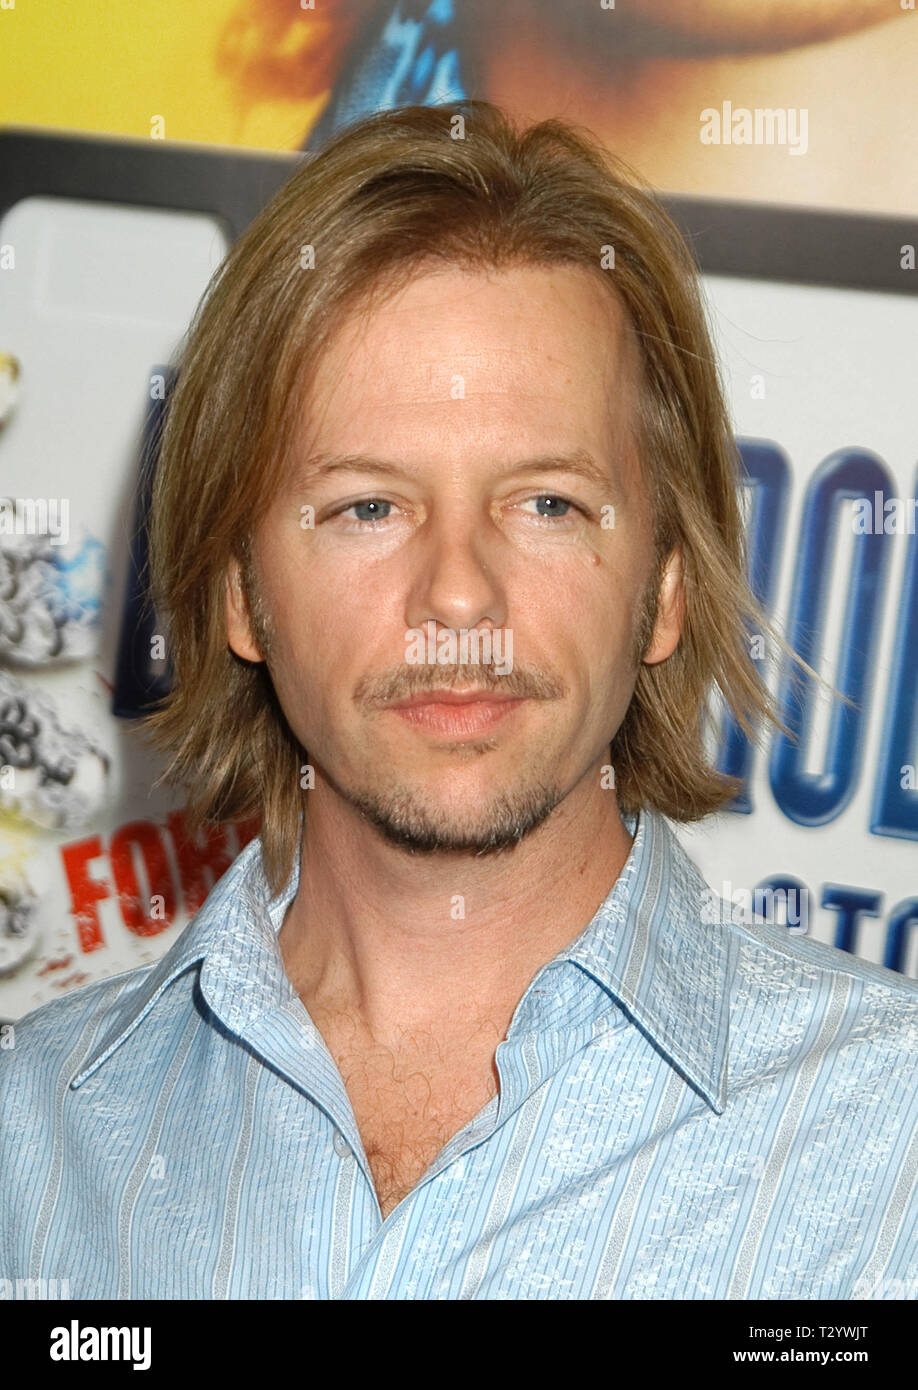 David Spade at the "Dickie Roberts: Former Child Star" World Premiere benefiting the Chris Farley Foundation at the Cinerama Dome at the ArcLight Hollywood in Hollywood, CA. The event took place on Wednesday, September 3, 2003.  Photo by: SBM / PictureLux  File Reference # 33790_782SBMPLX Stock Photo